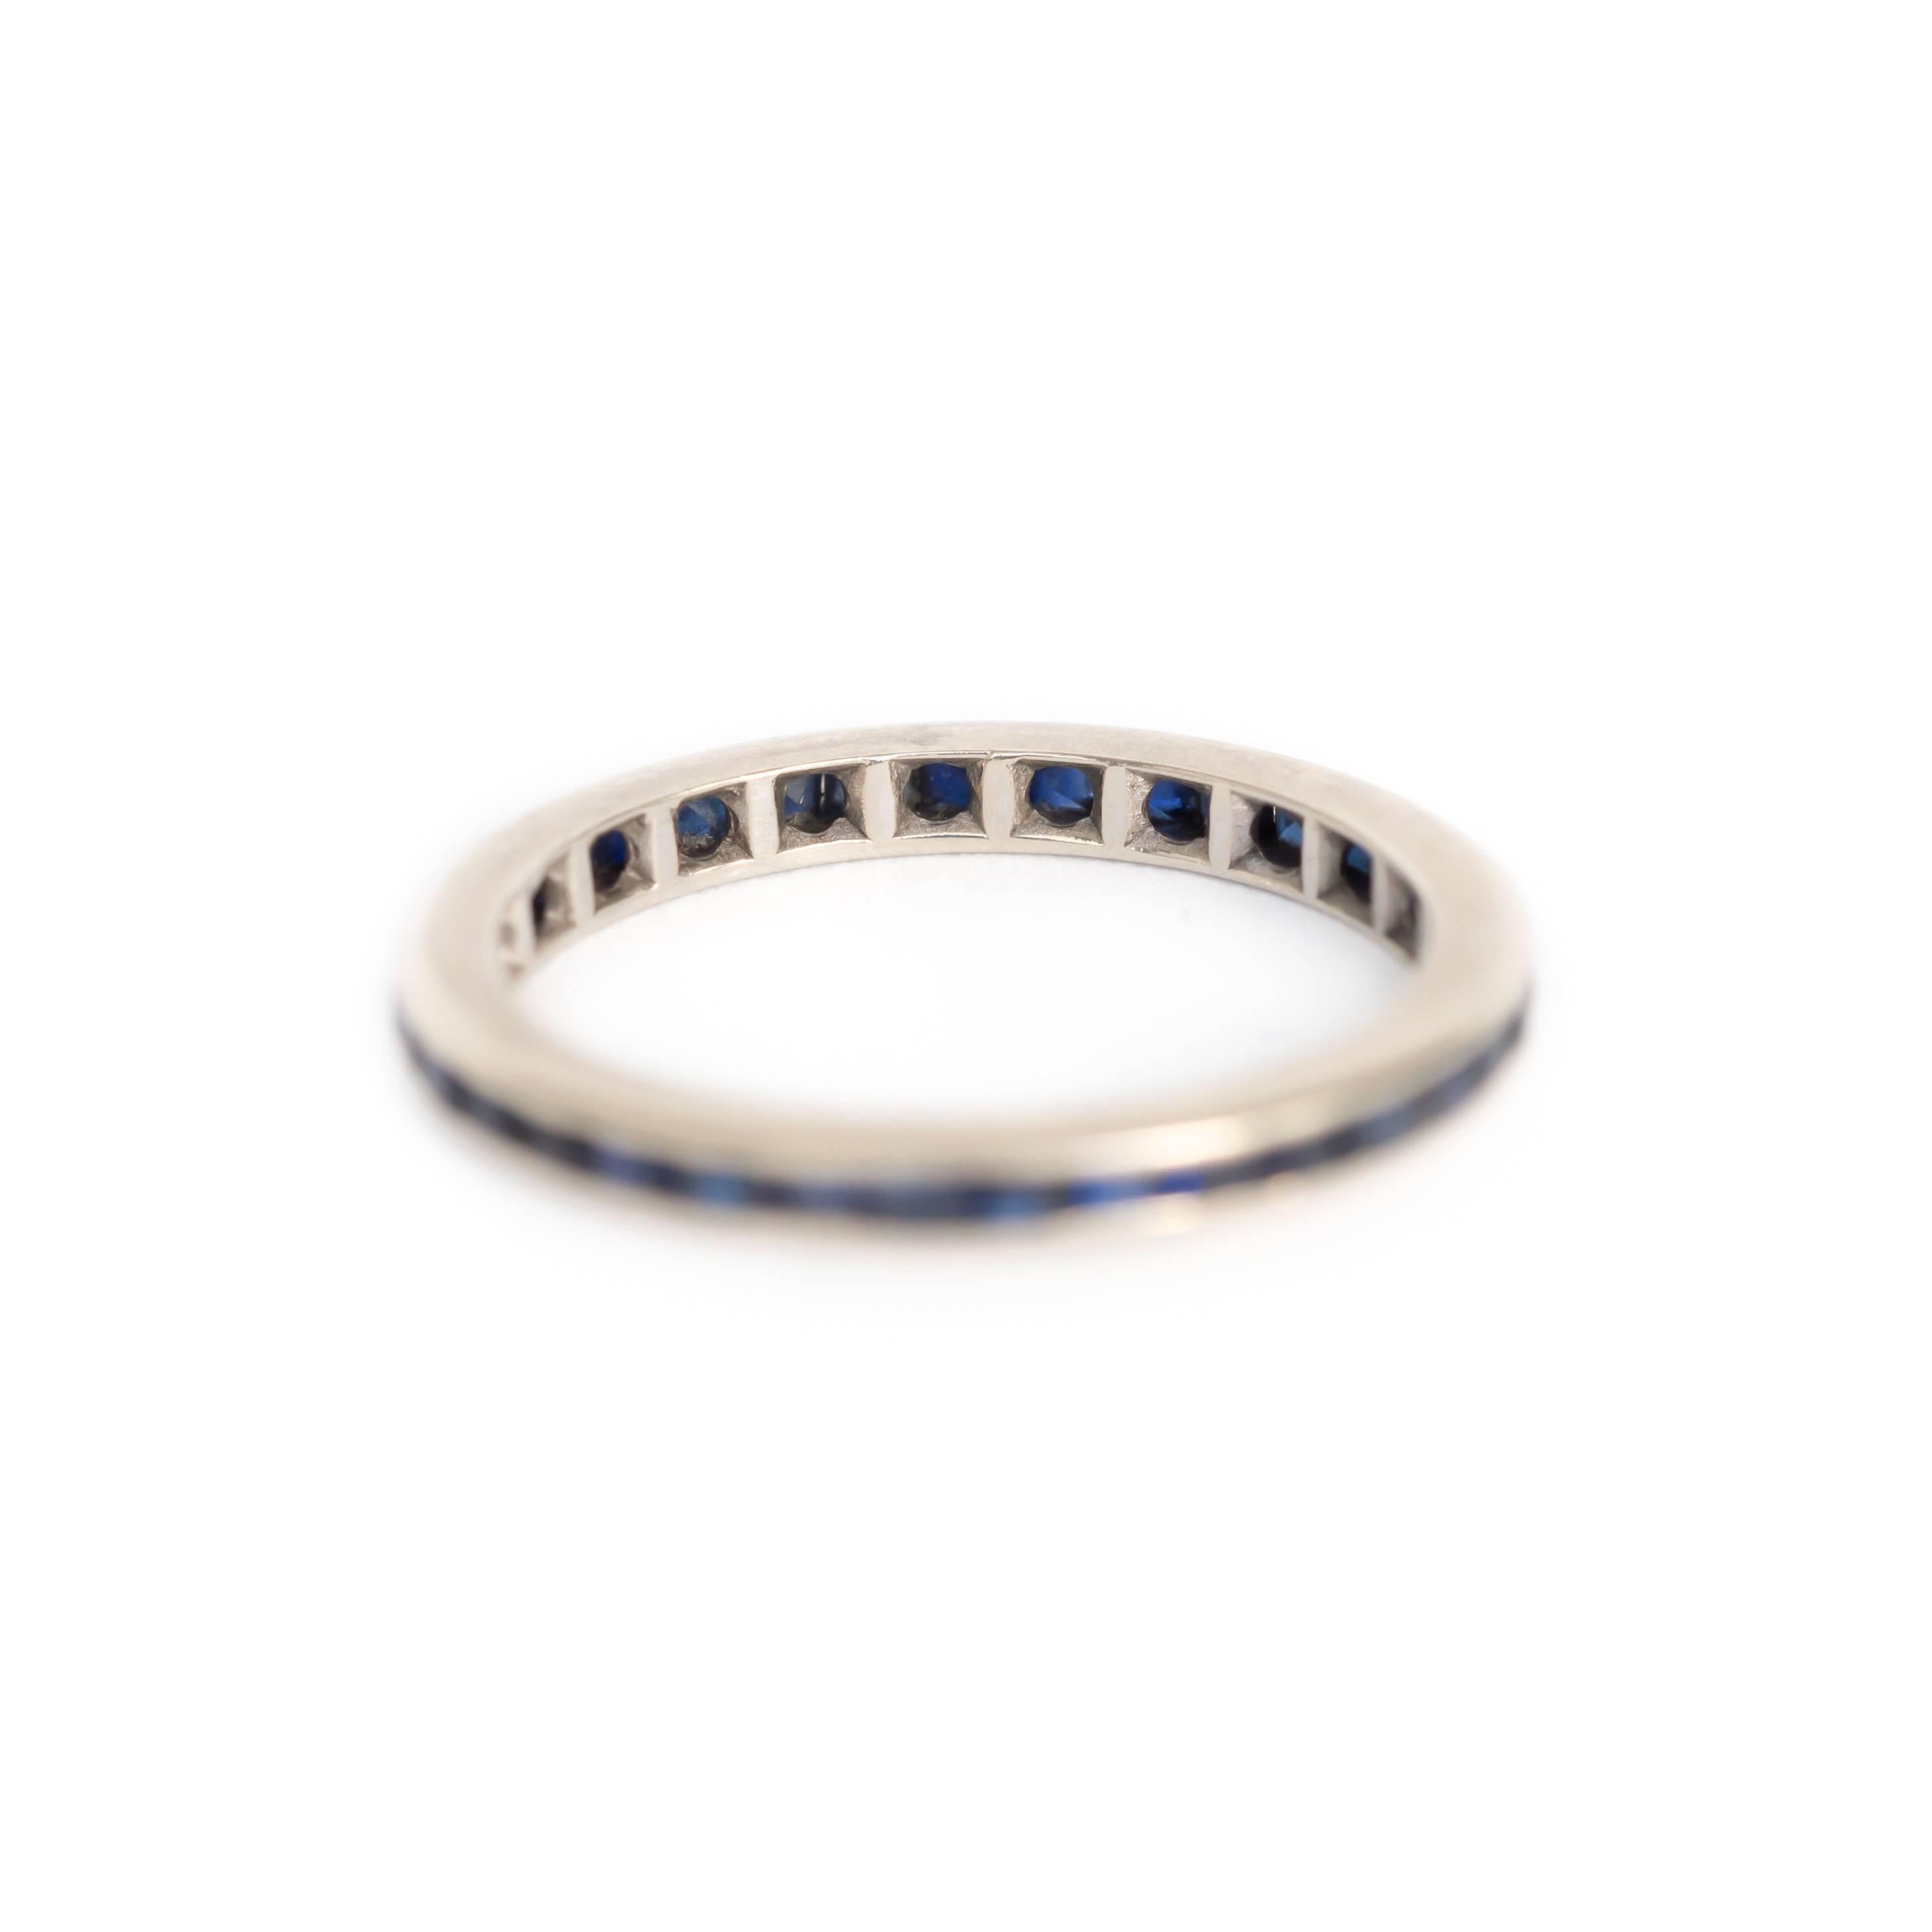 Item Details: 
Ring Size: Approximately 5.95
Metal Type: 14 Karat White Gold
Weight: 1.3 grams

Color Stone Details: 
Type: Natural Sapphire
Shape: Princess Cut
Carat Weight: 1.25 carat, total weight.
Color: Deep Blue

Finger to Top of Stone